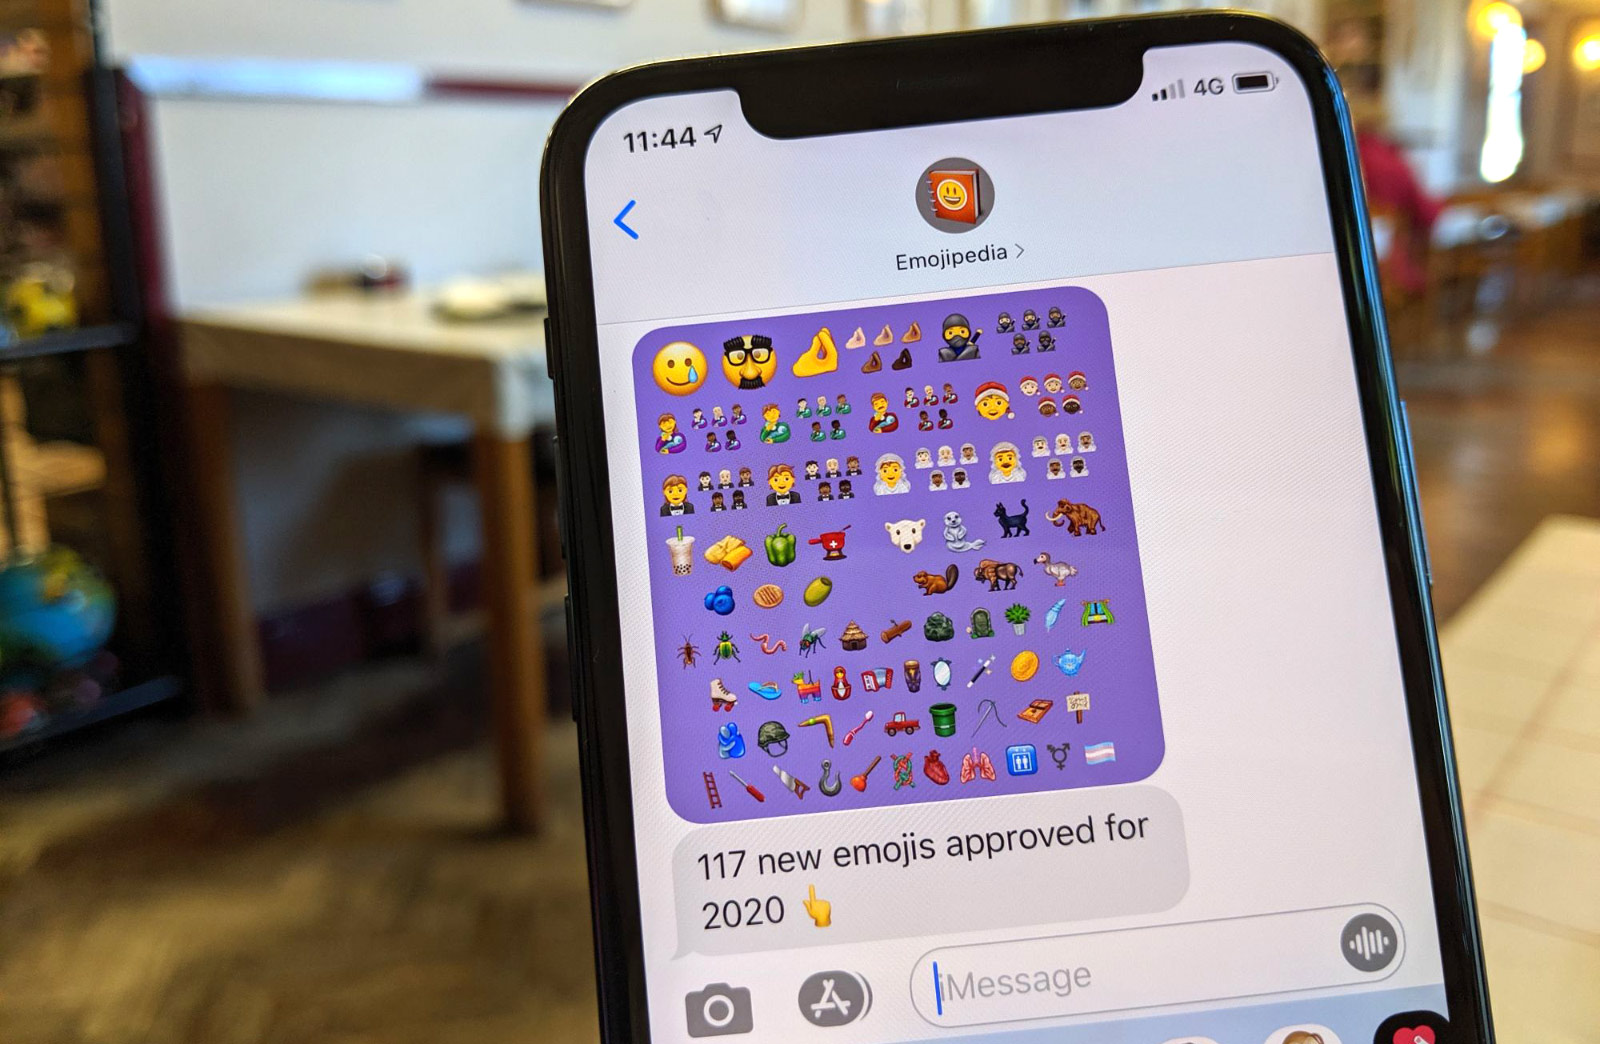 117 new emojis for 2020.